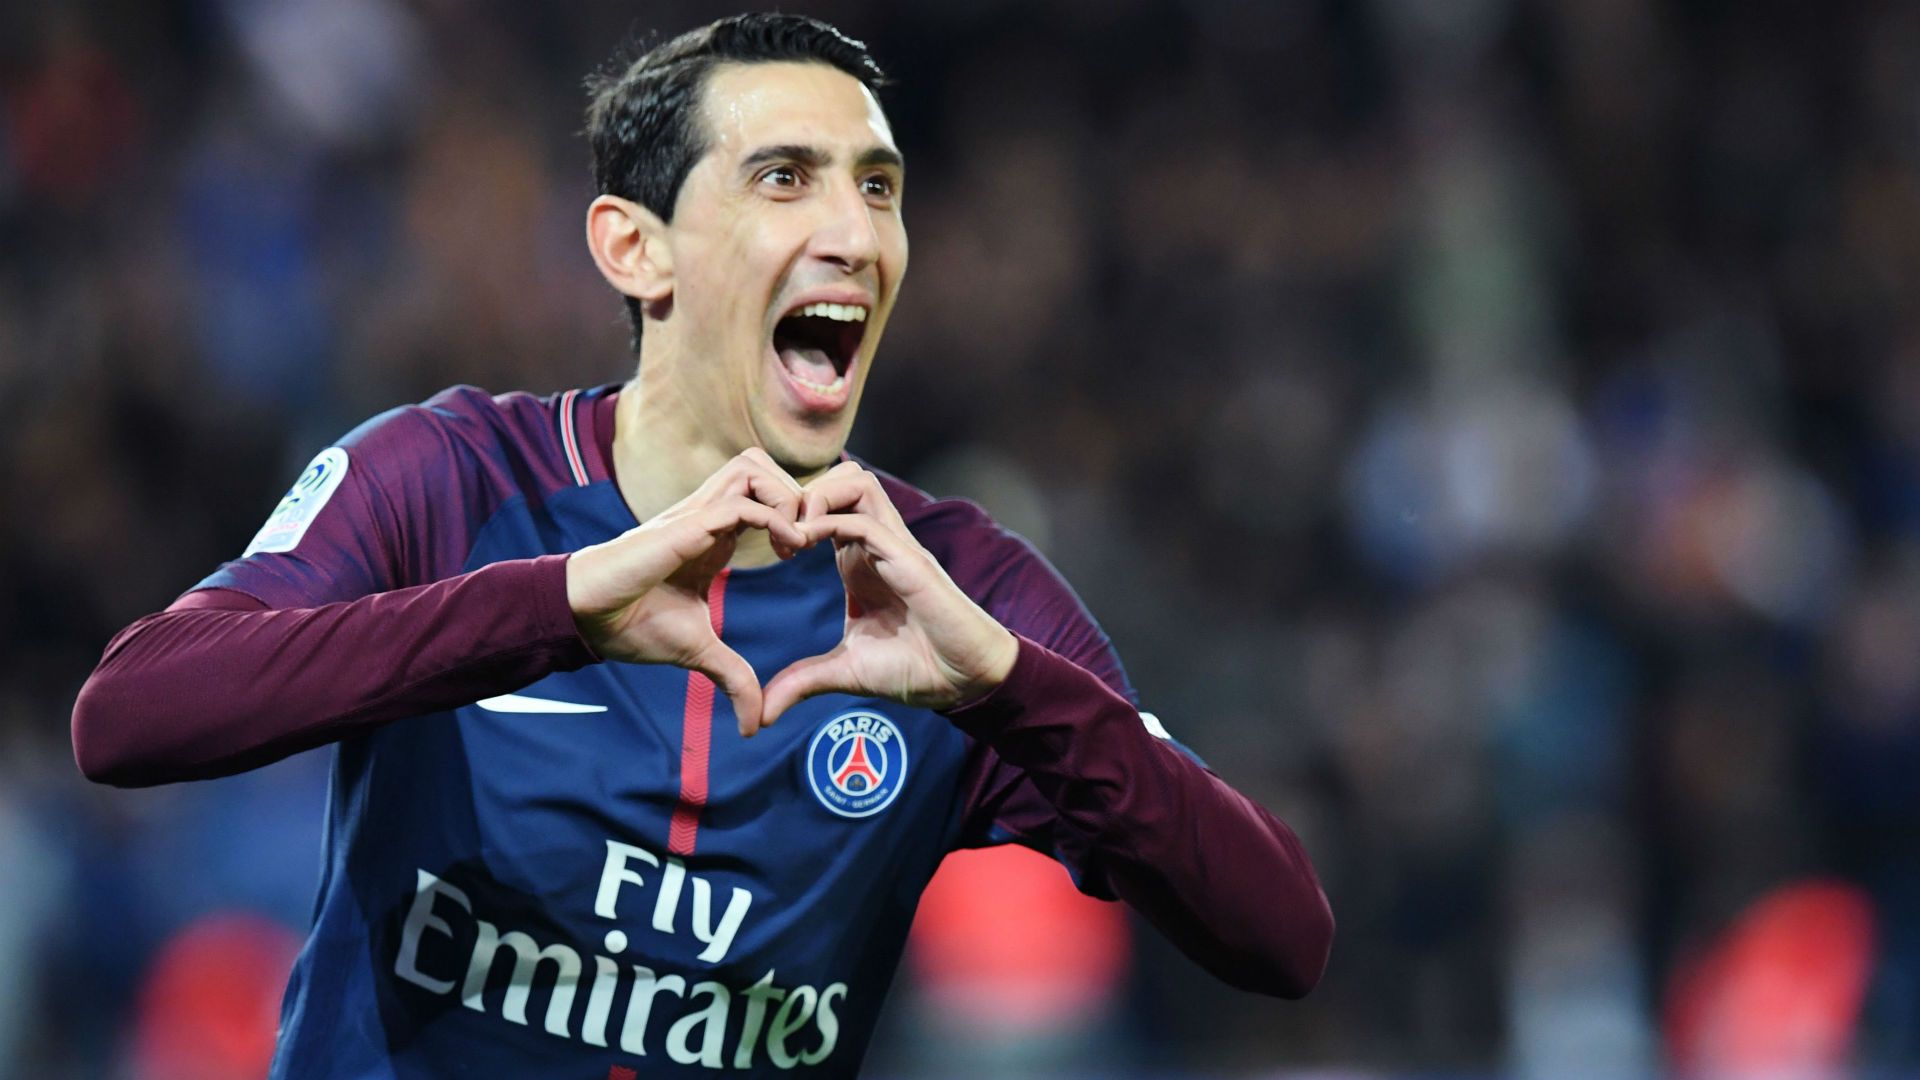 Transfer news: Angel Di Maria hints at possible PSG exit ahead of another big summer spend